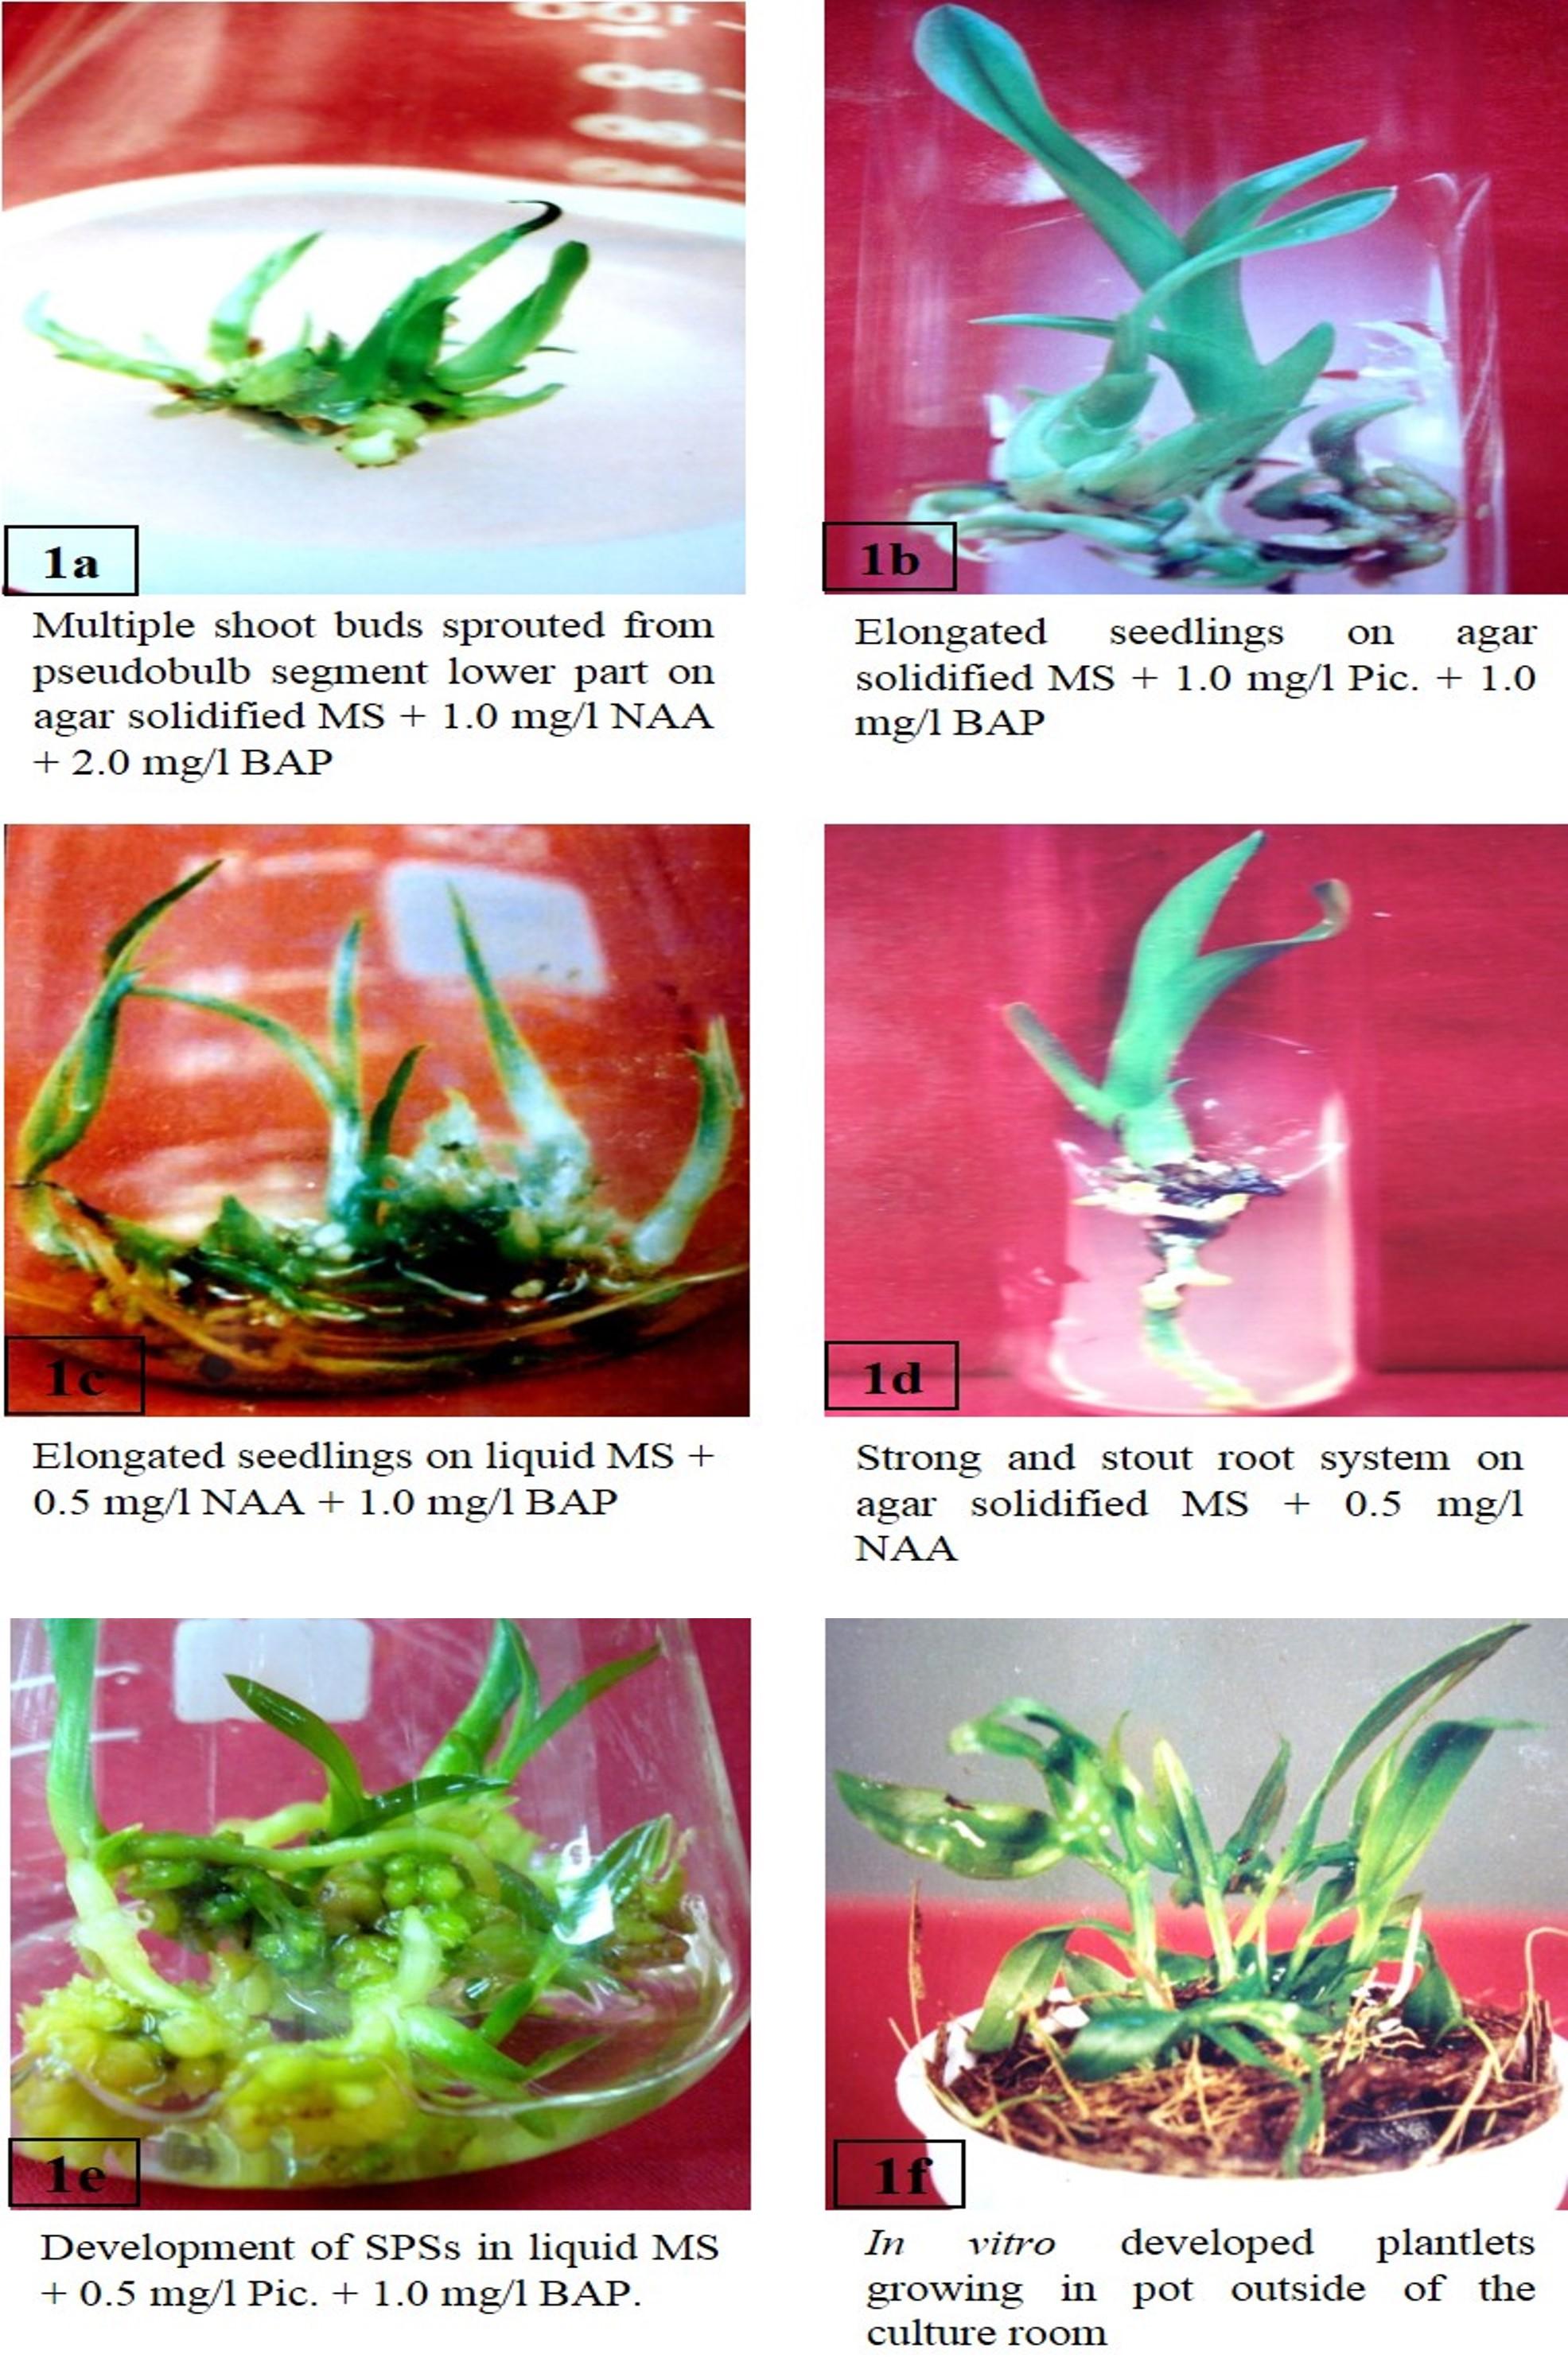 Micropropagation of commercially important orchid Dendrobium palpebrae Lindl. through in vitro developed pseudobulb culture